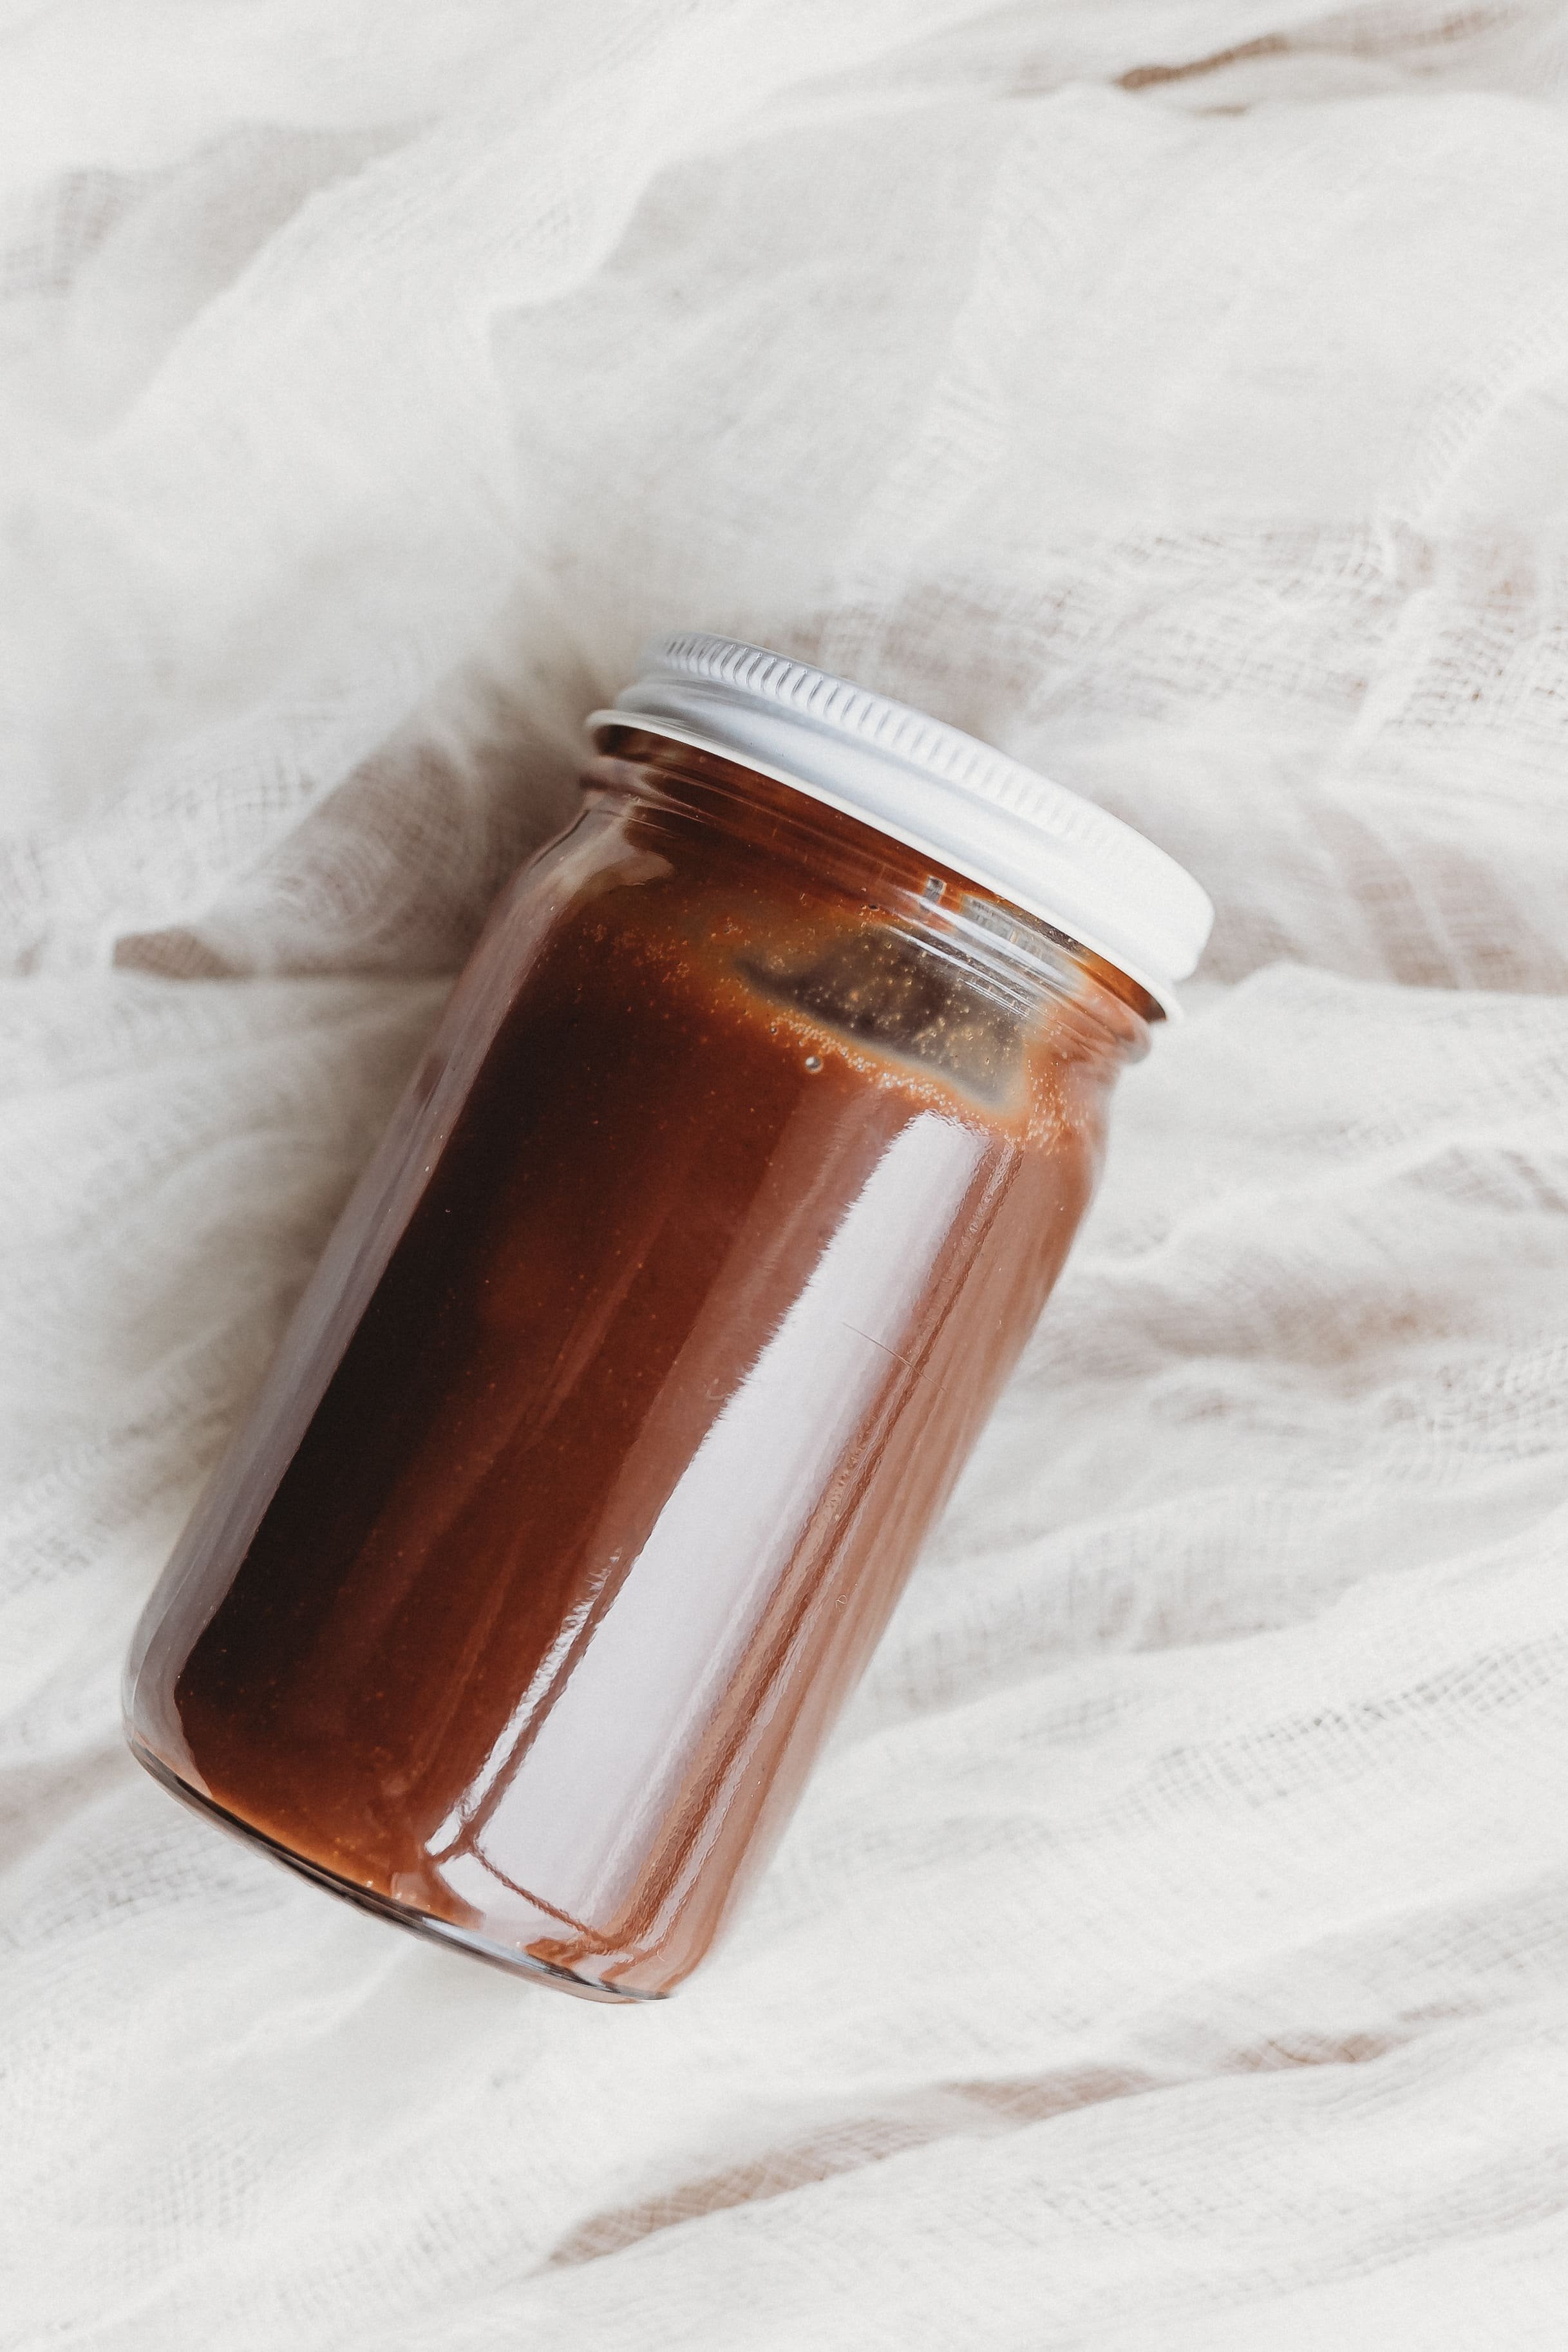  chocolate hazelnut spread in a jar rests on a marble surface during a food product photography 